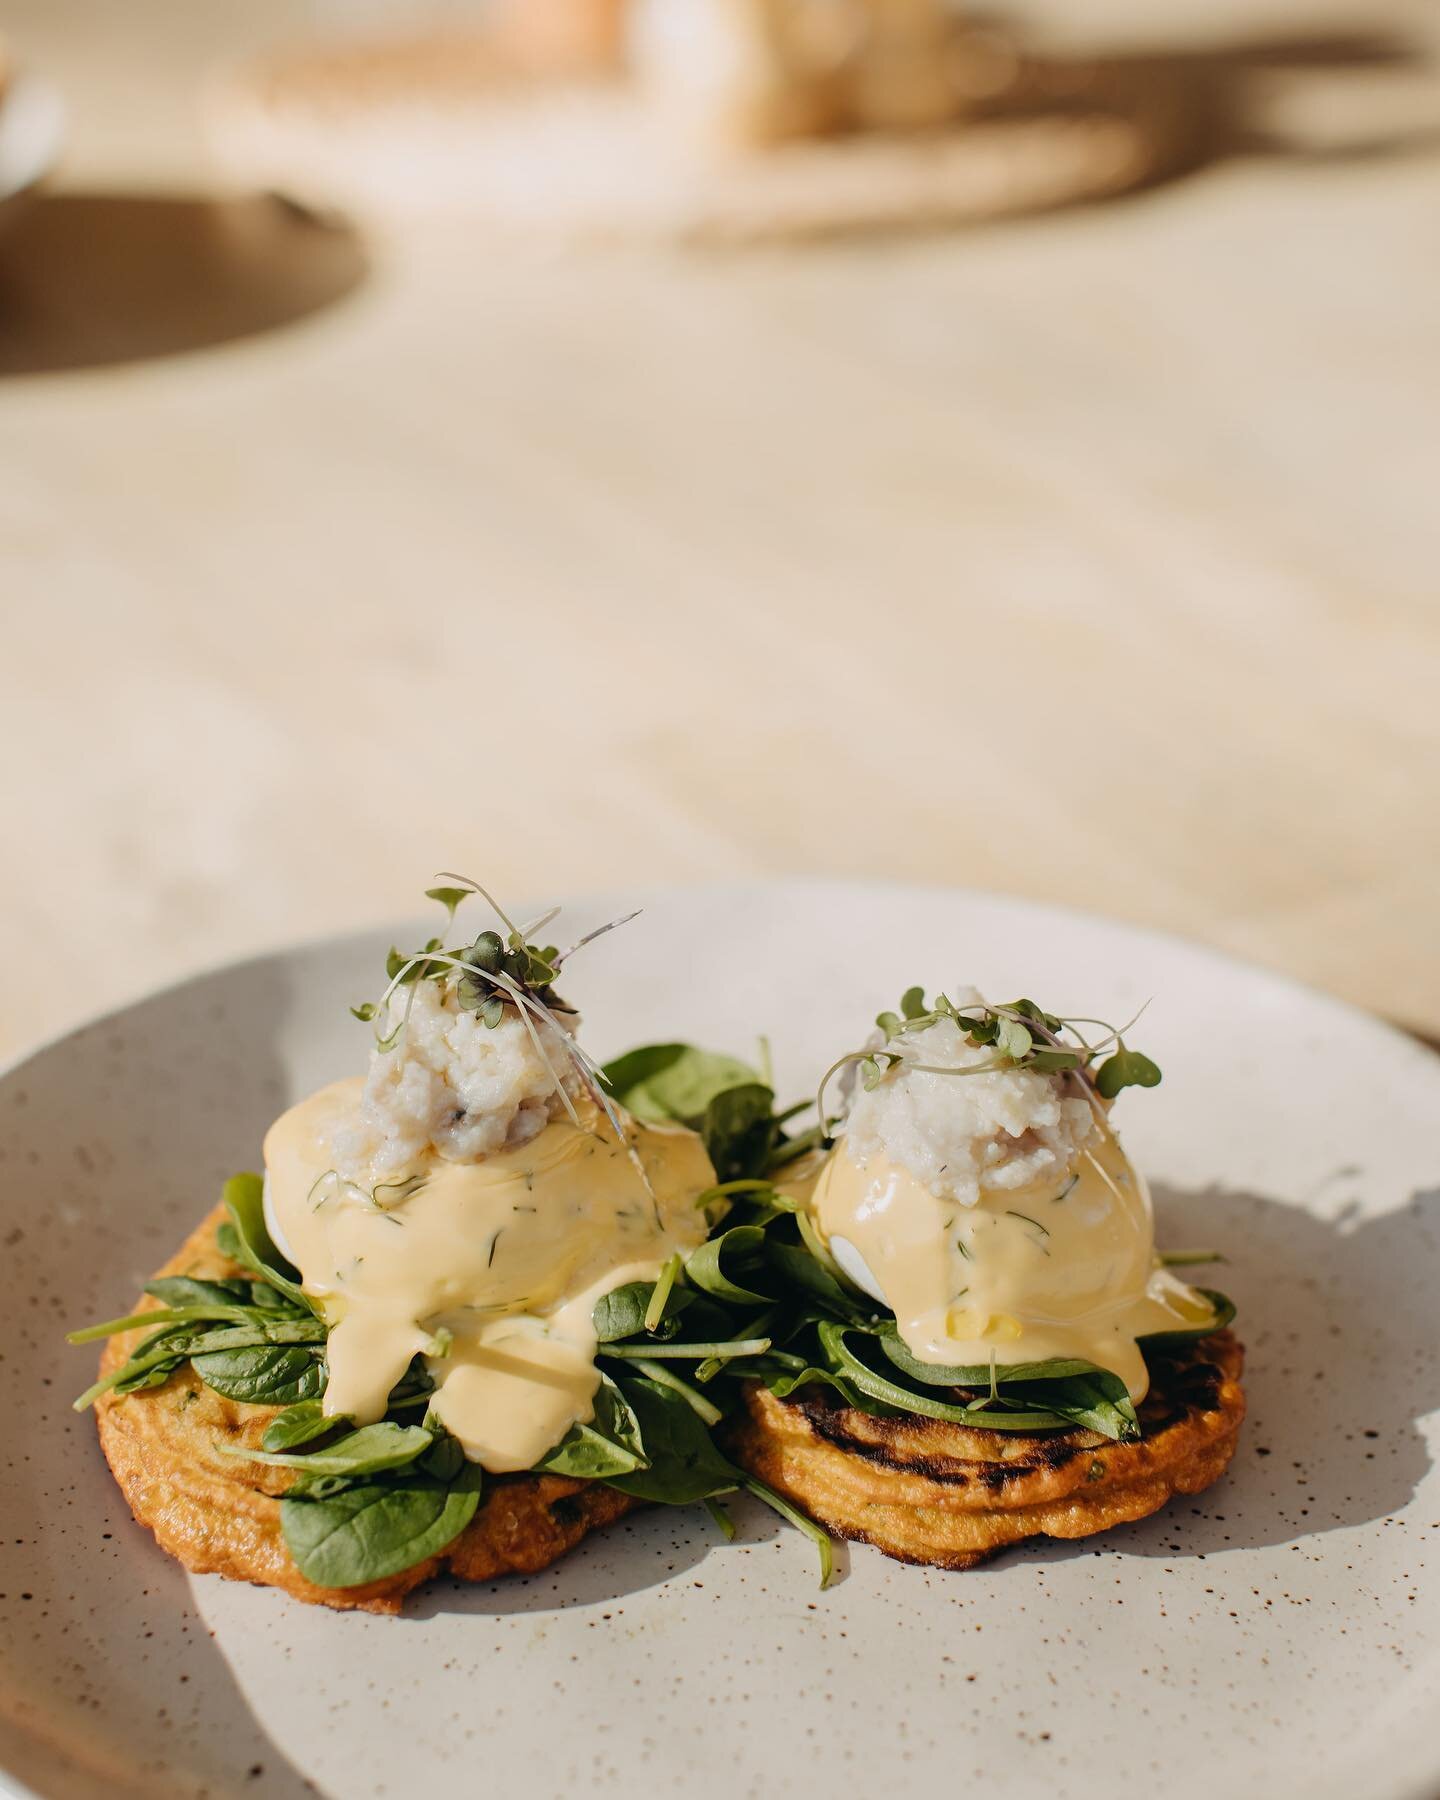 Our Sweetcorn fritters, poached eggs, dill hollandaise with blue swimmer crab is a must try